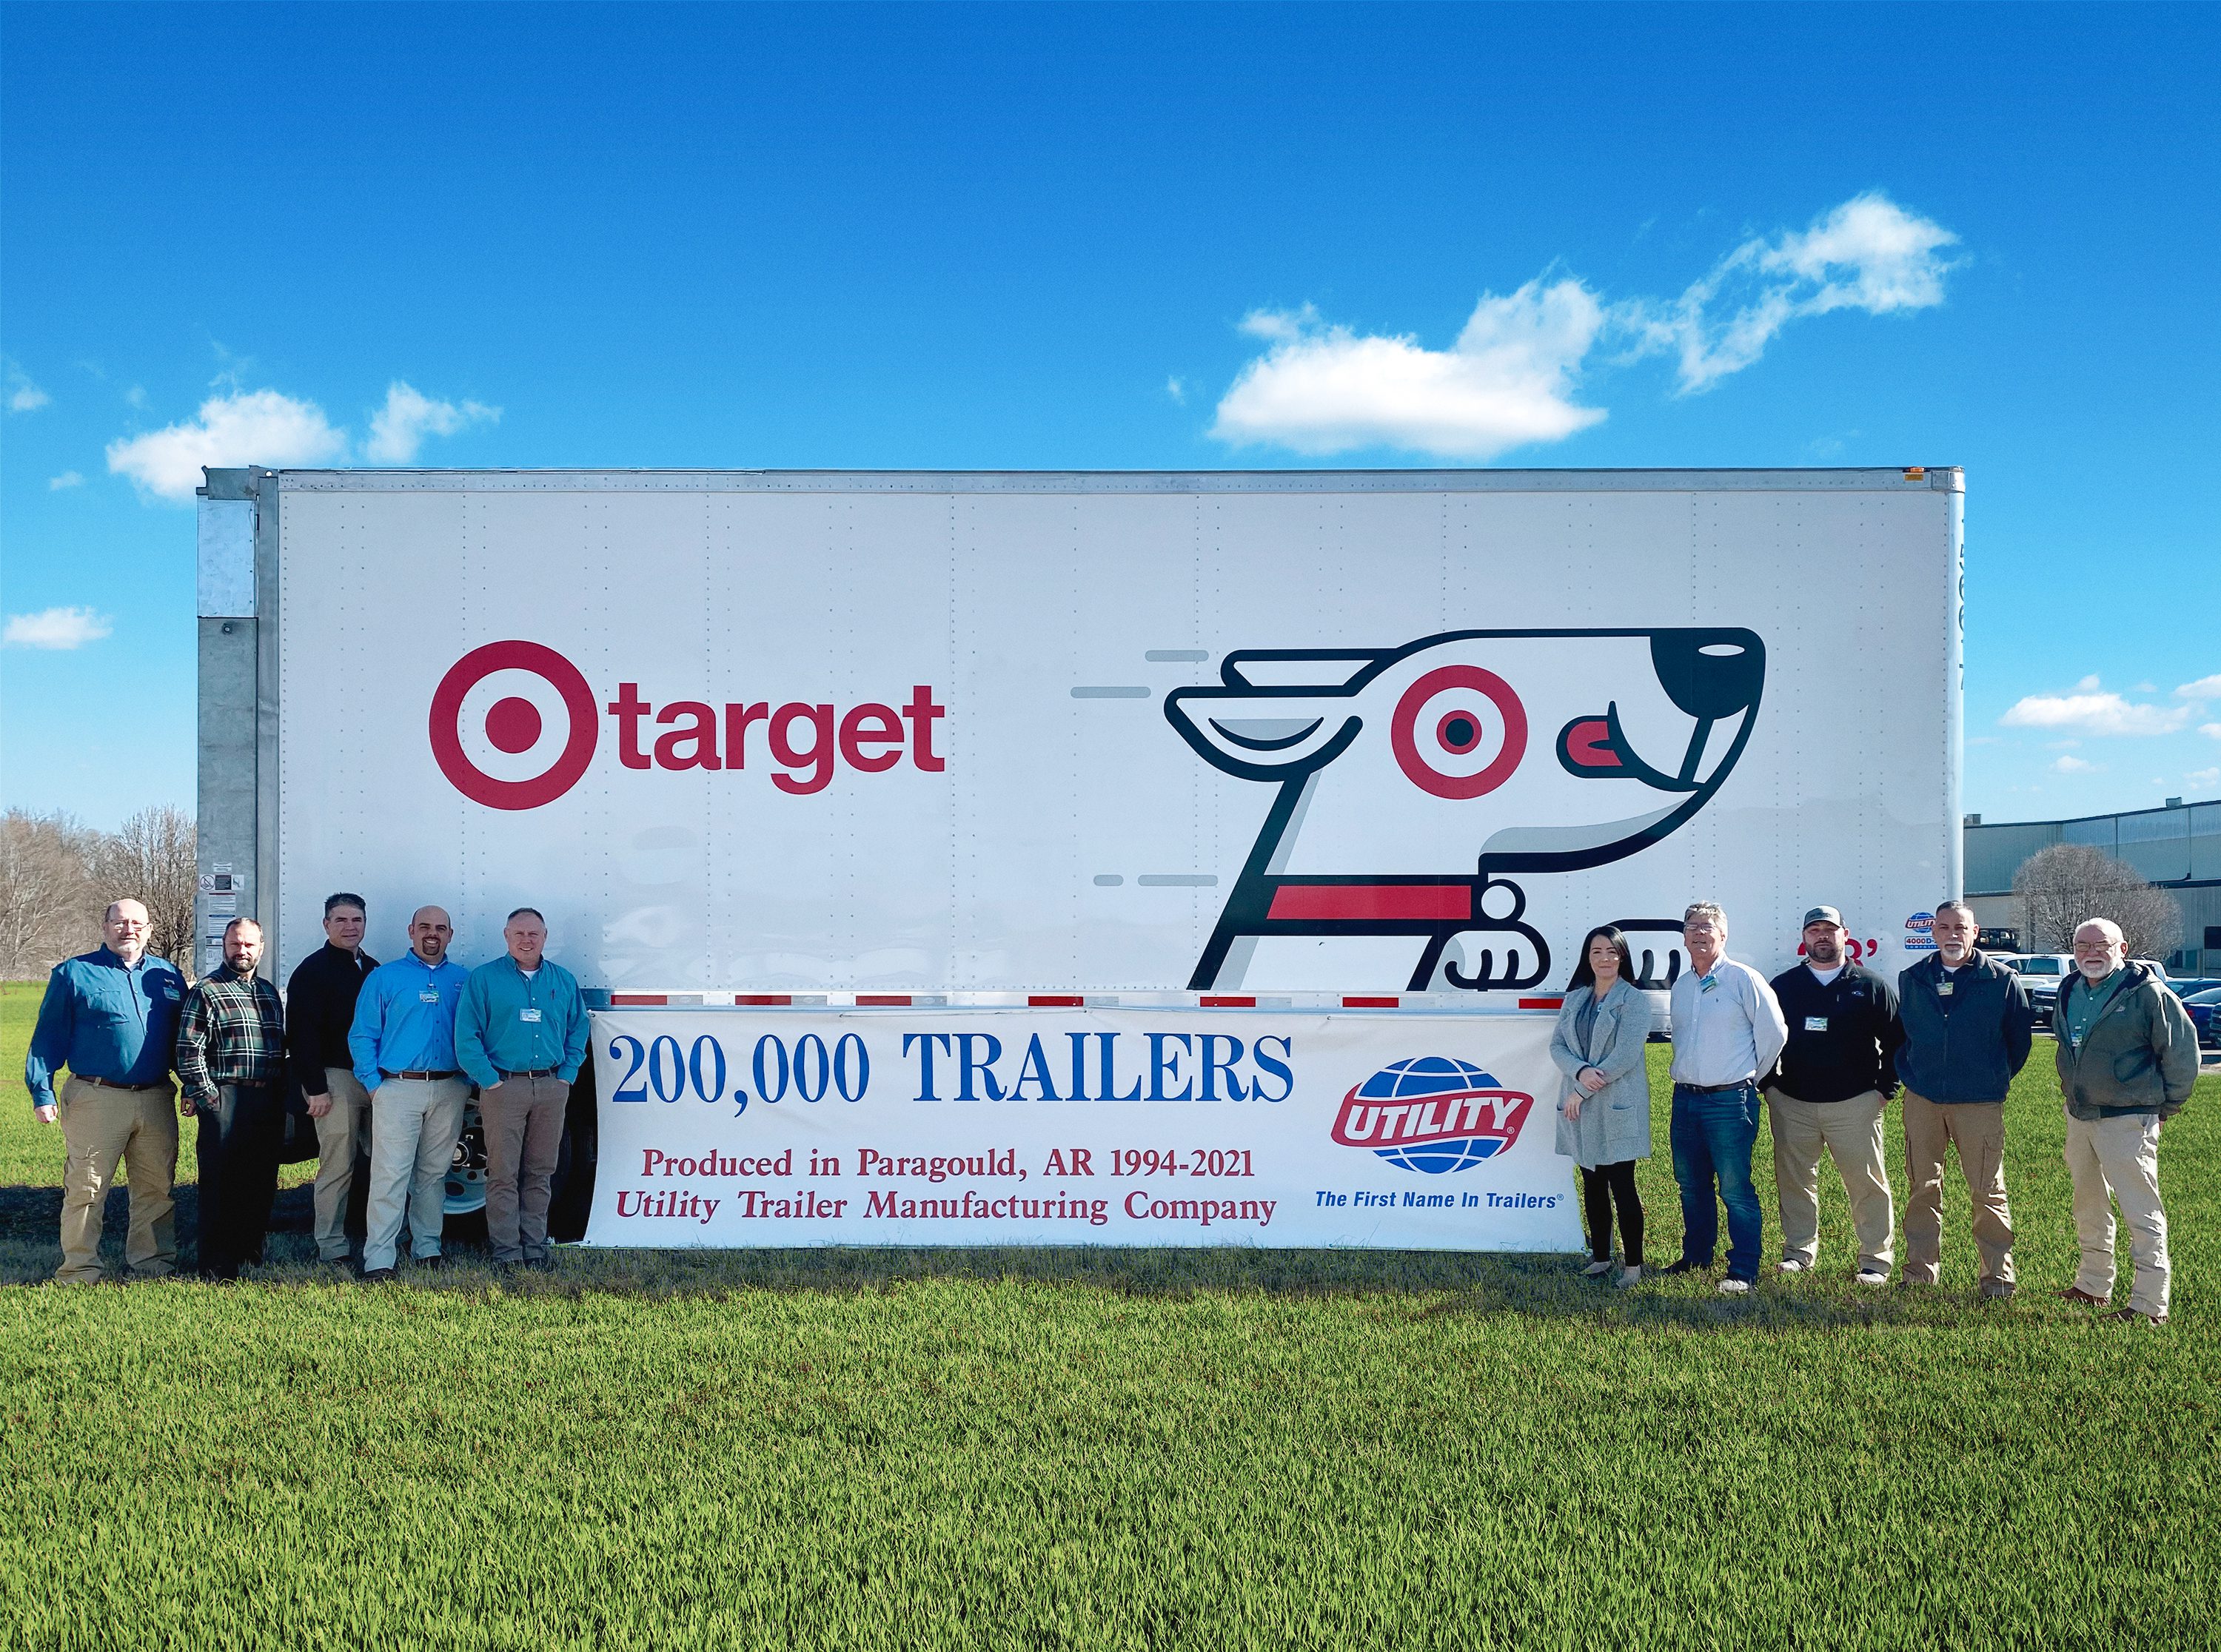 Utility’s Paragould, Arkansas Manufacturing Plant Produces its 200,000th Trailer